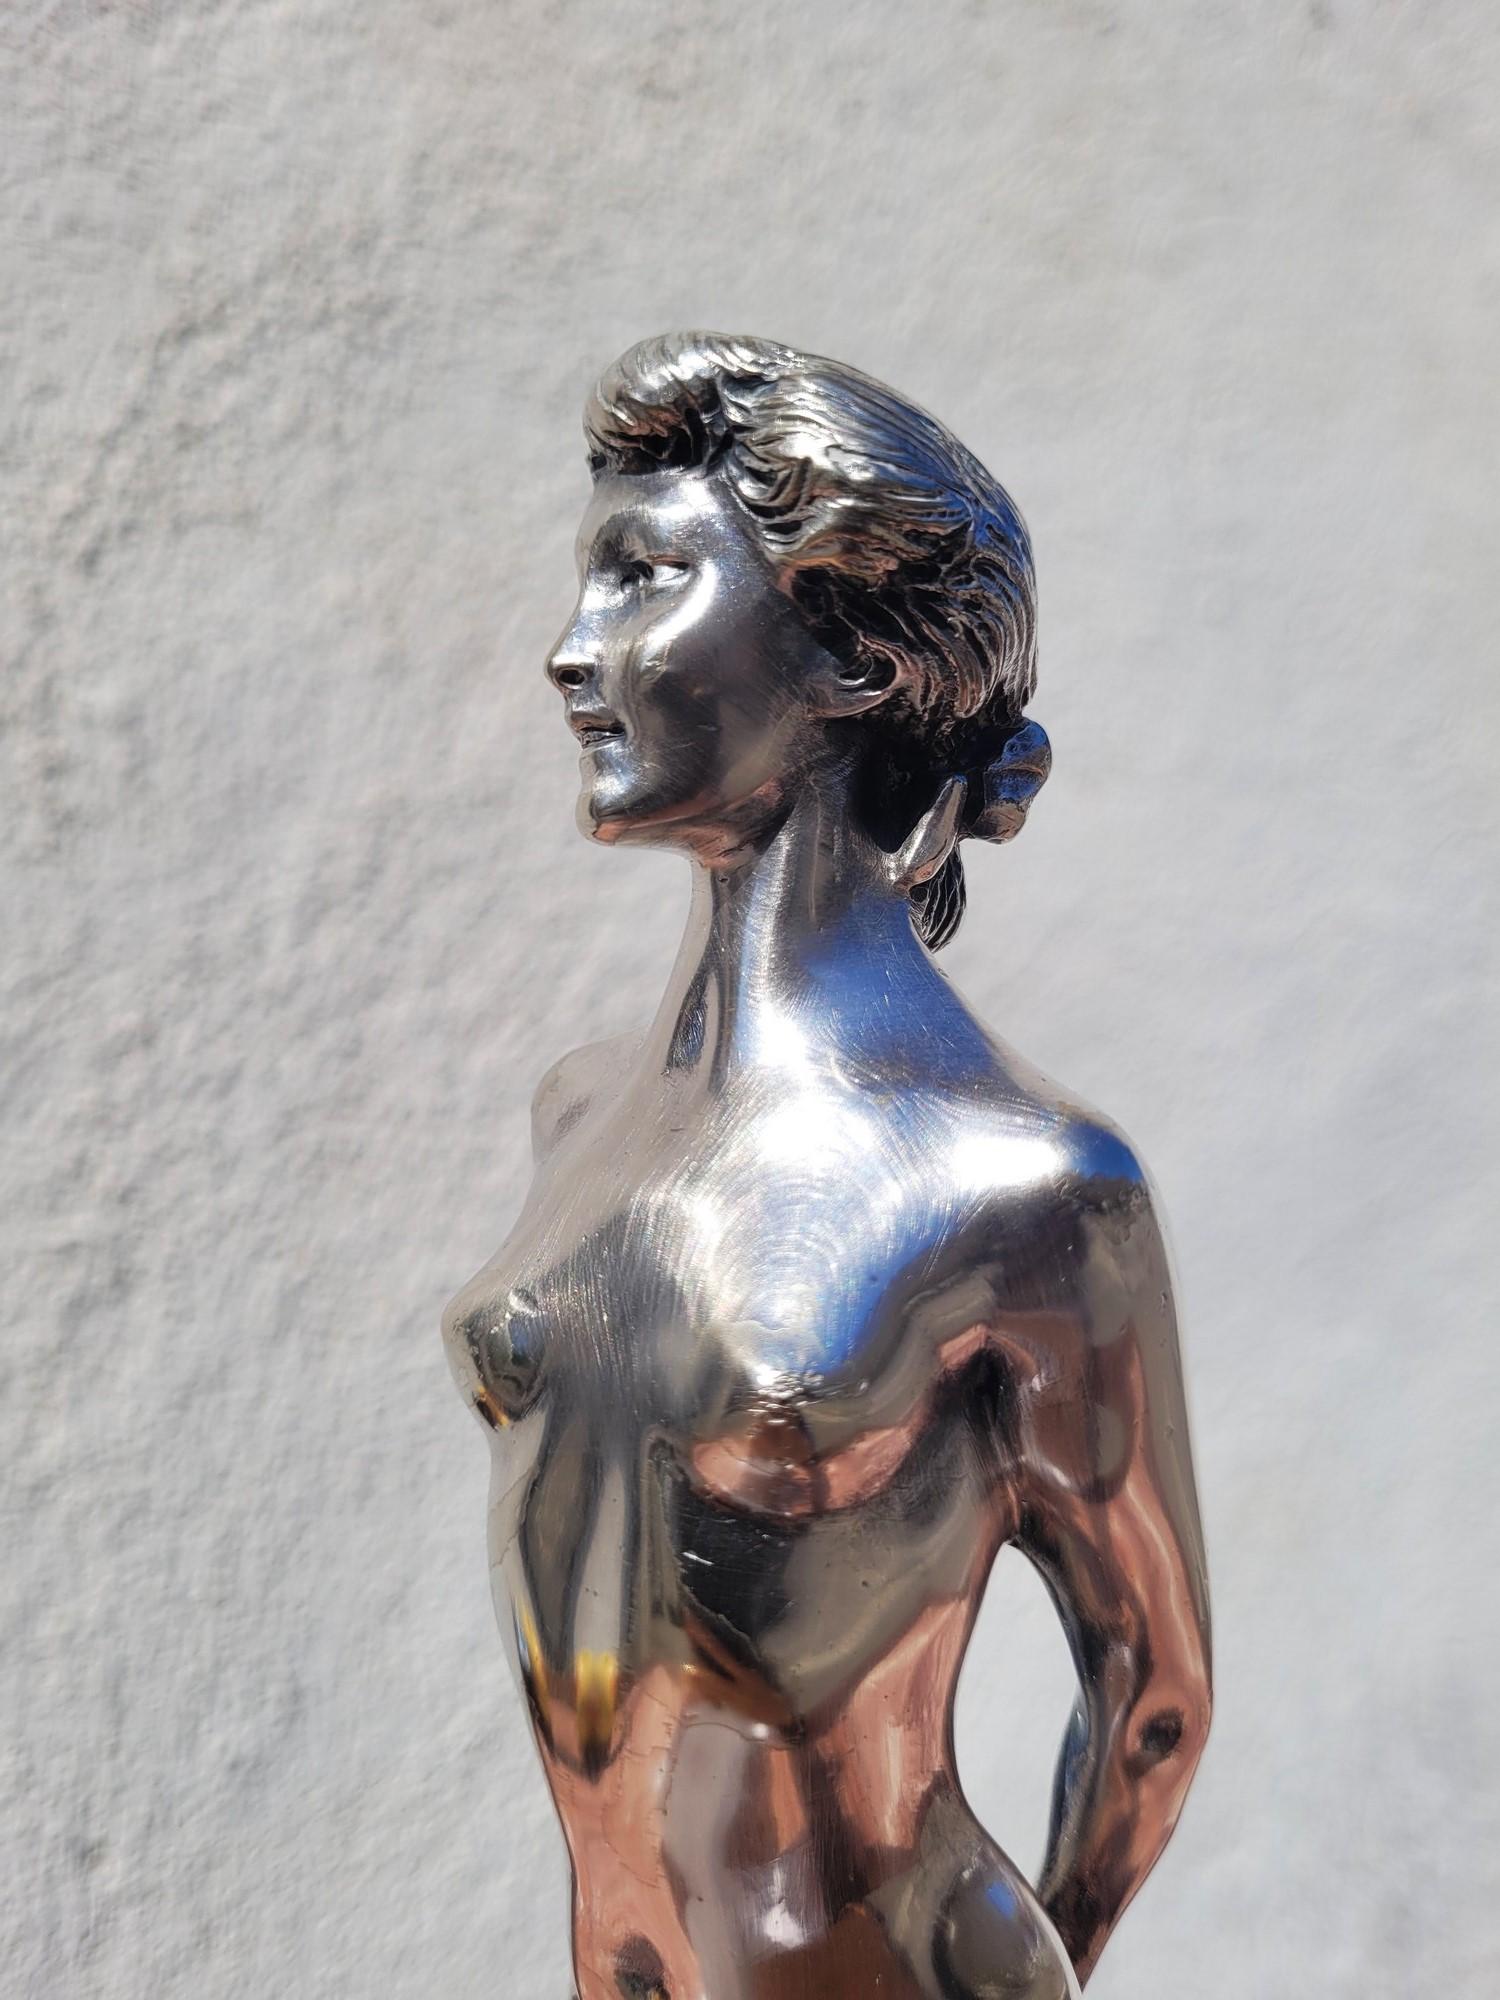 Silver-plated bronze of a naked woman, her hair raised and holding a sheet behind her back.

This sculpture is signed by Joe Descomps

Joe Descomps is a French artist, member of the Society of Artists since 1883; he exhibited at the Salons and won